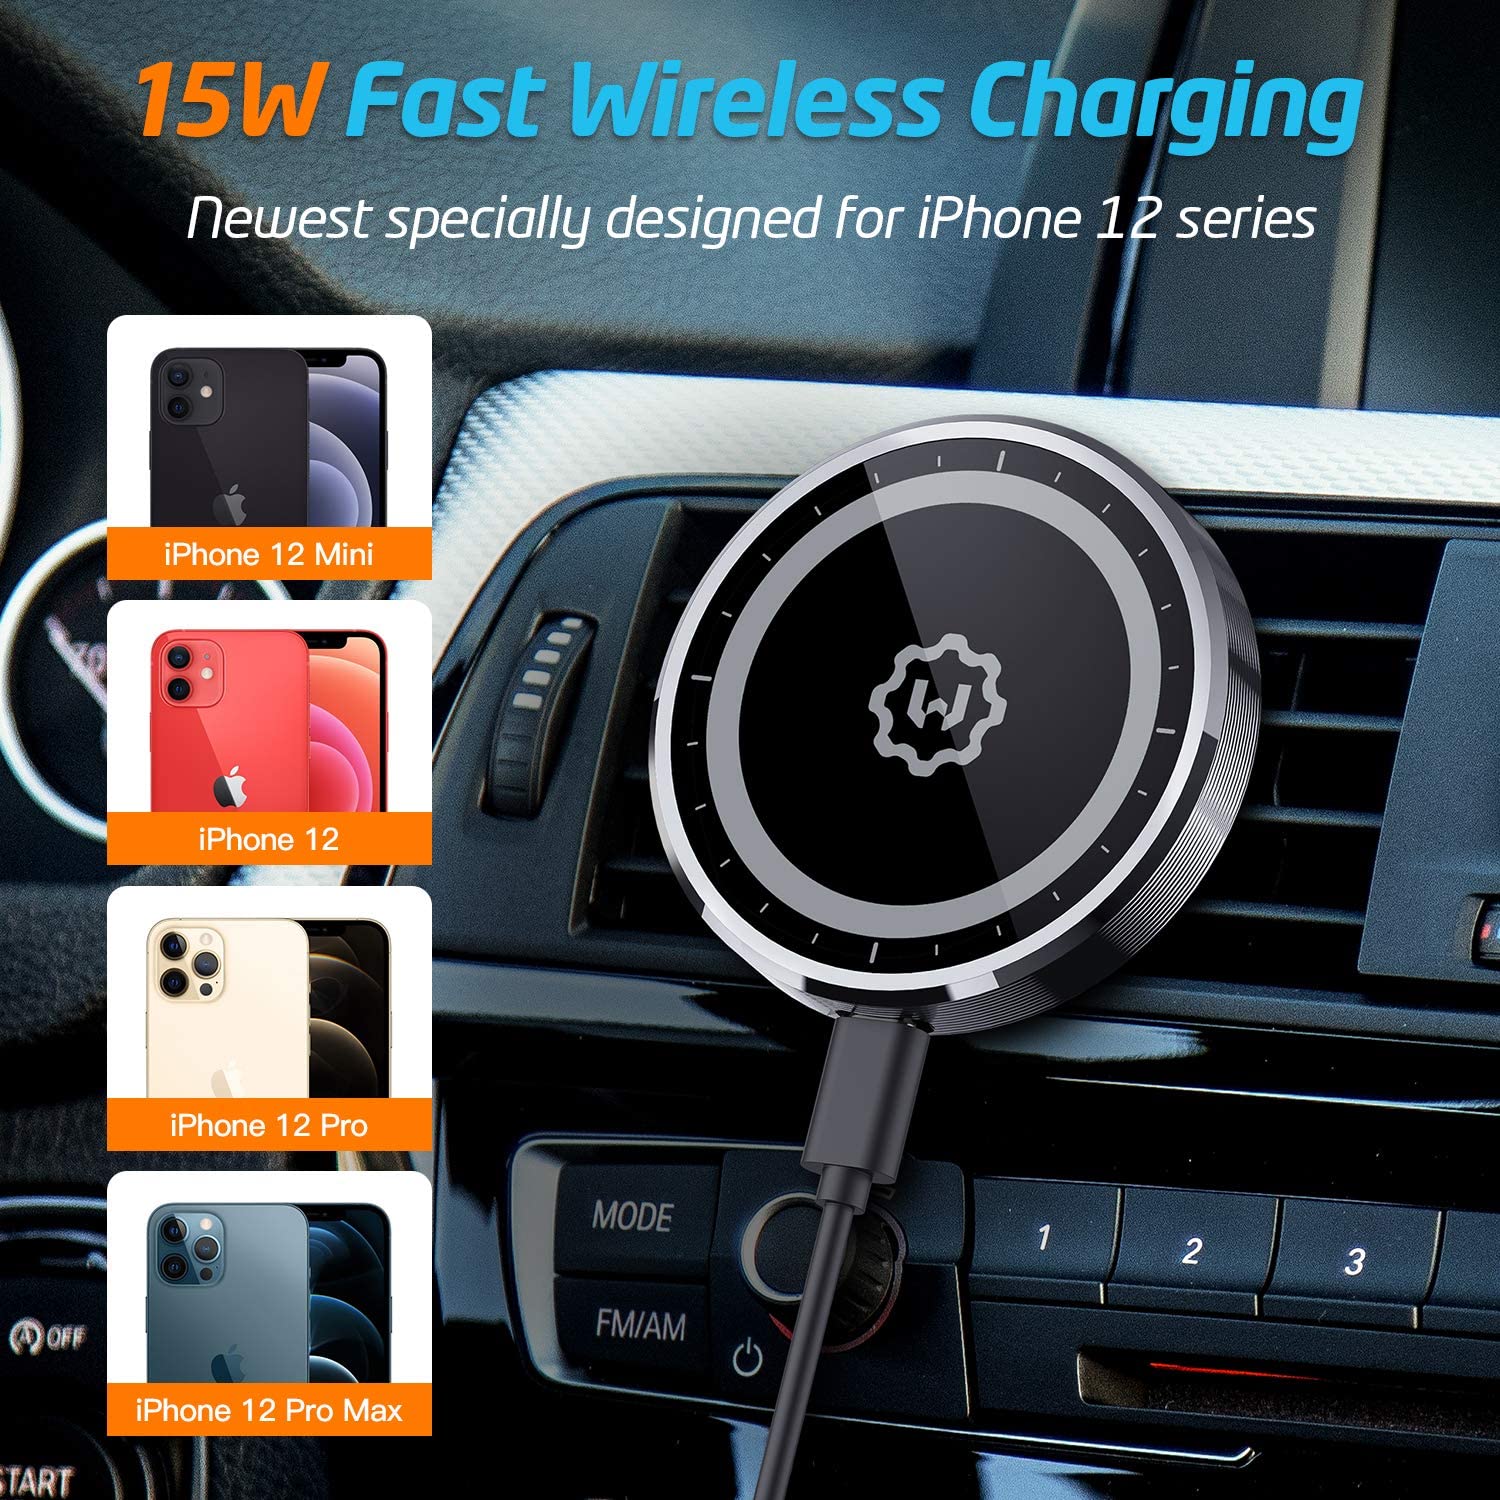 Wireless Magnetic Car Charger, WixGear Wireless Magnetic Air Vent and Dashboard Car Charger, Compatible with iPhone 12 Only